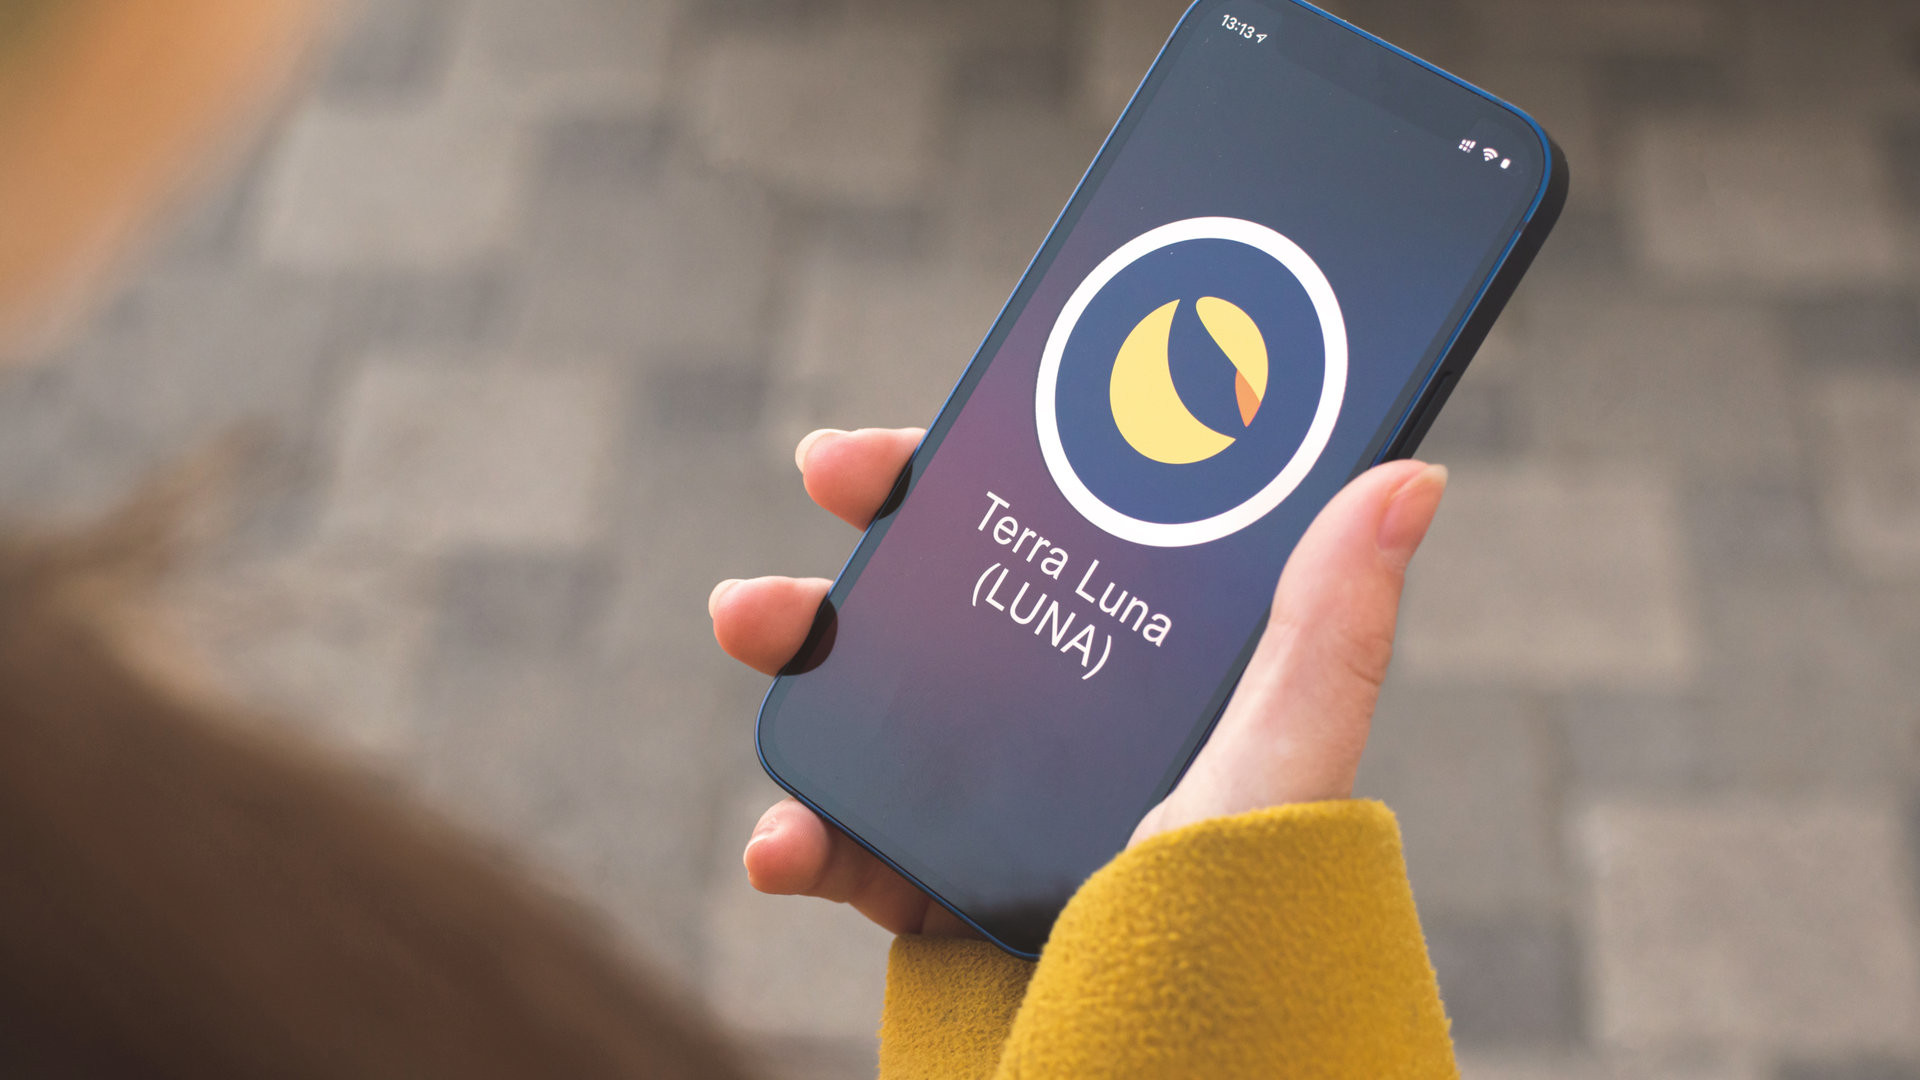 Terra Luna cryptocurrency symbol, logo. Business and financial concept. Hand with smartphone, screen with crypto icon closeup